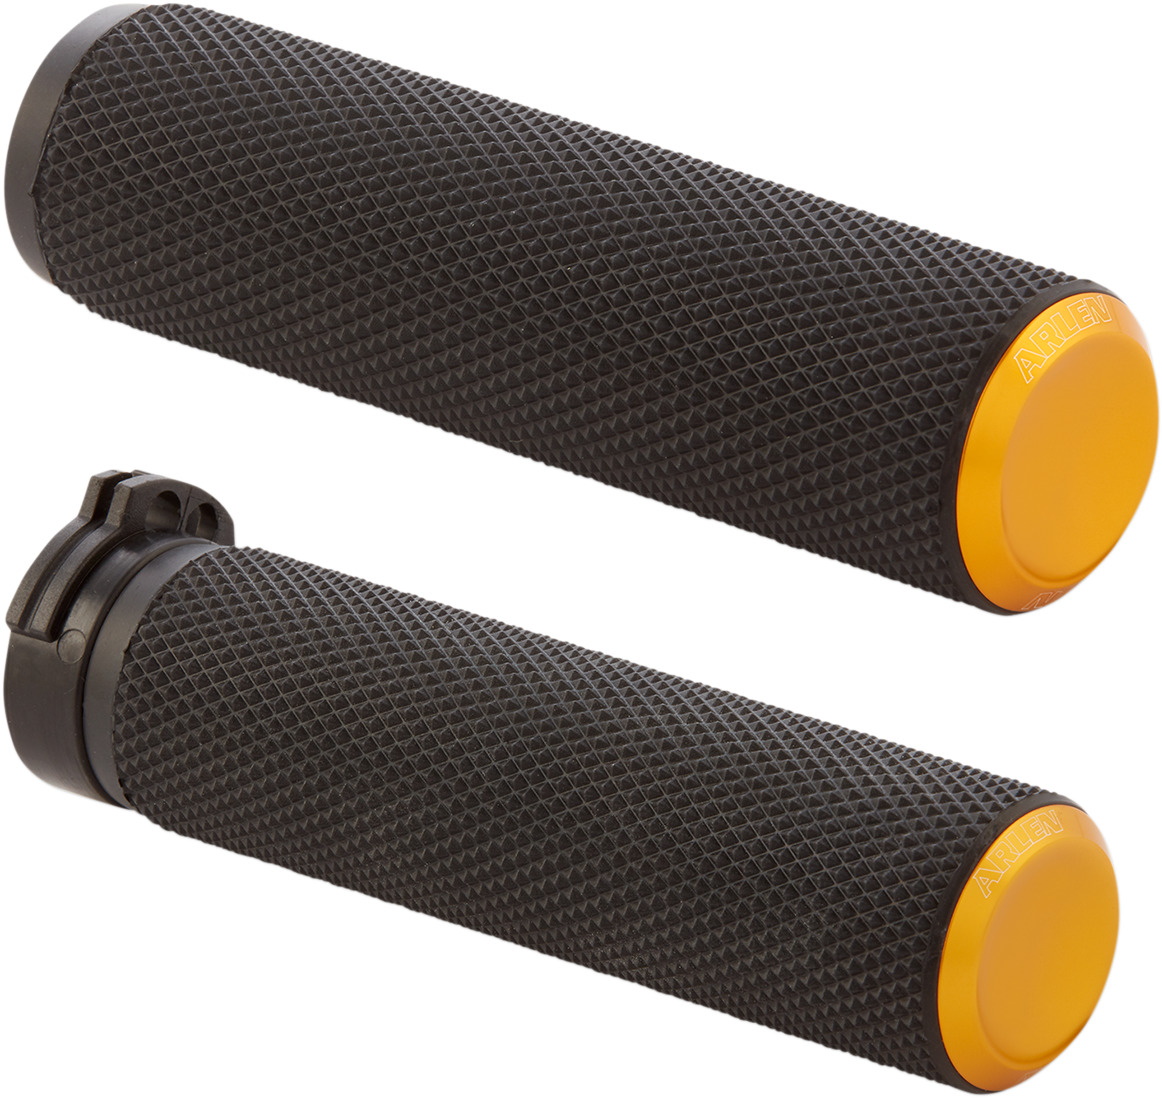 NEW ARLEN NESS Cable Fusion Series Grips 07-337